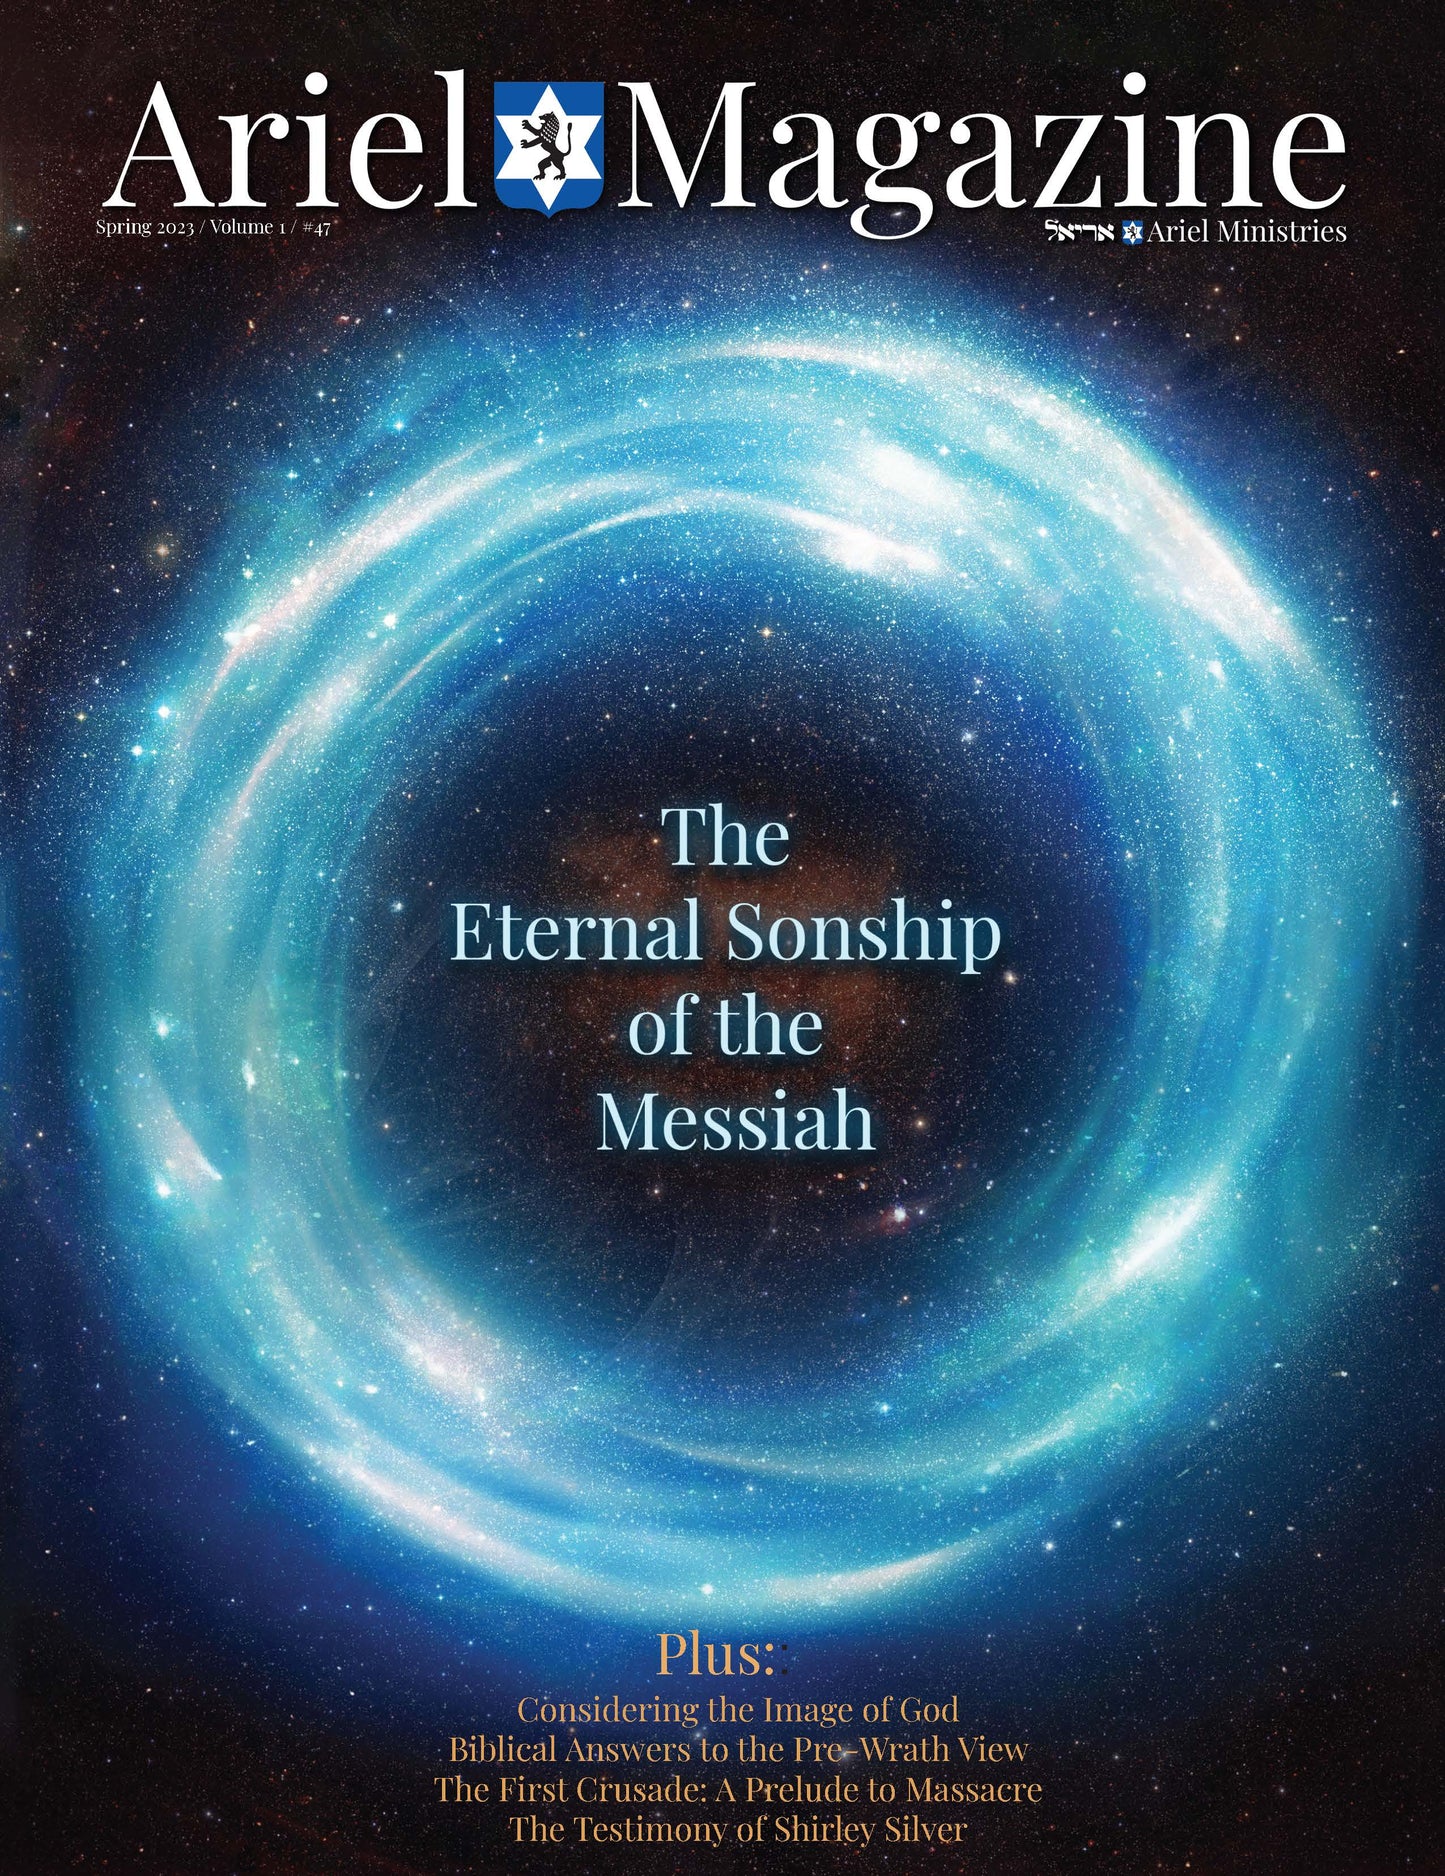 The Eternal Sonship of the Messiah